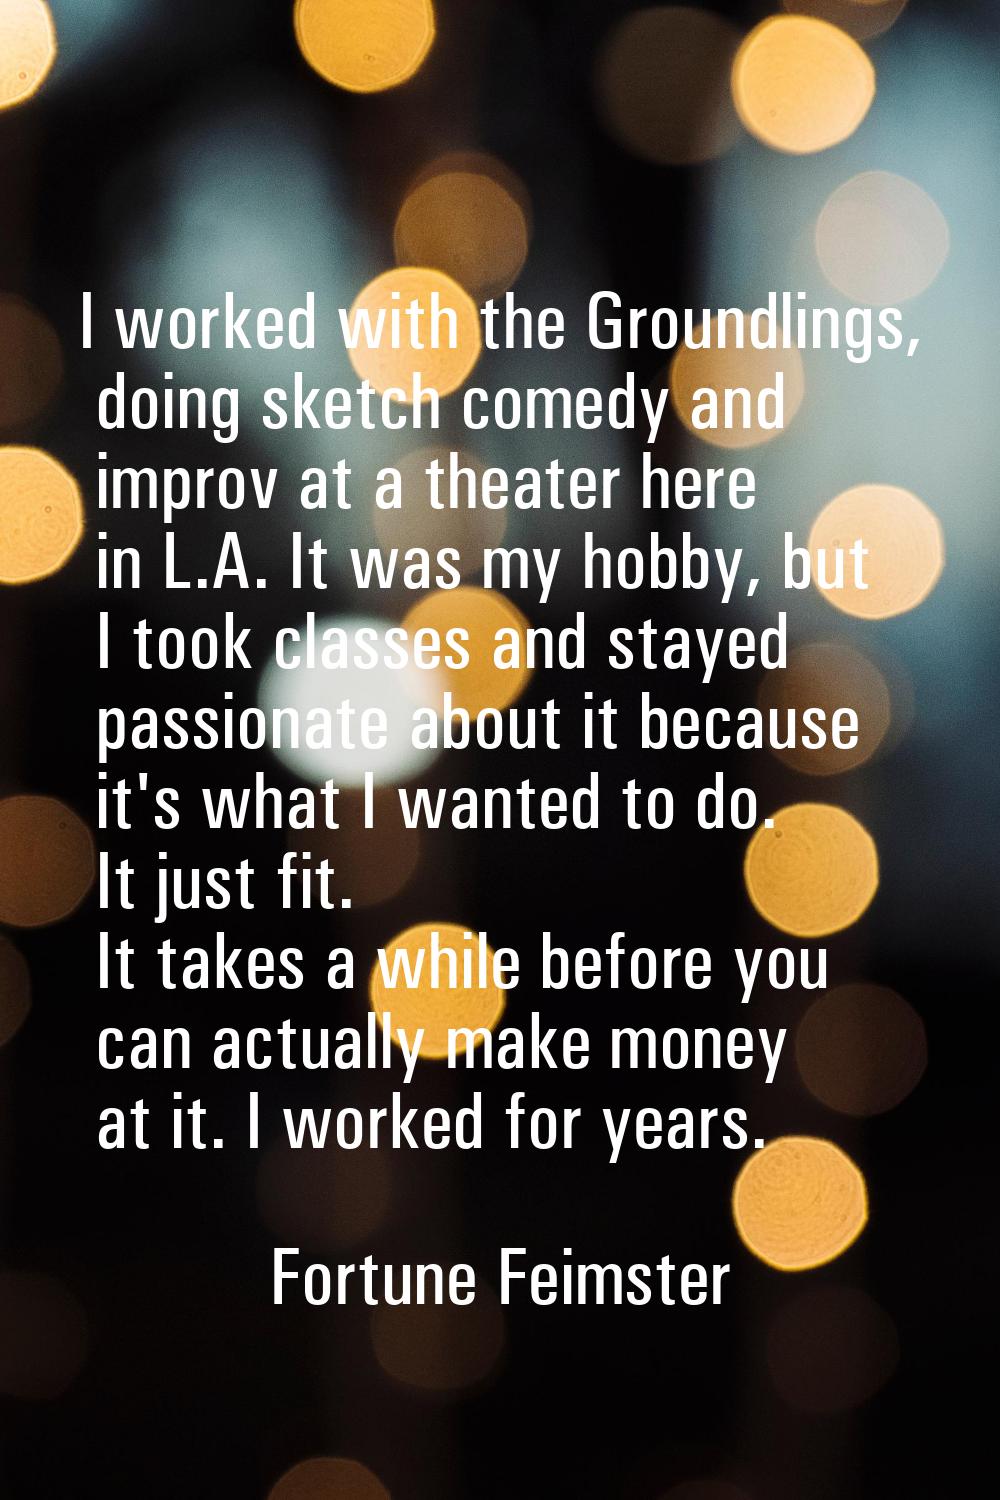 I worked with the Groundlings, doing sketch comedy and improv at a theater here in L.A. It was my h